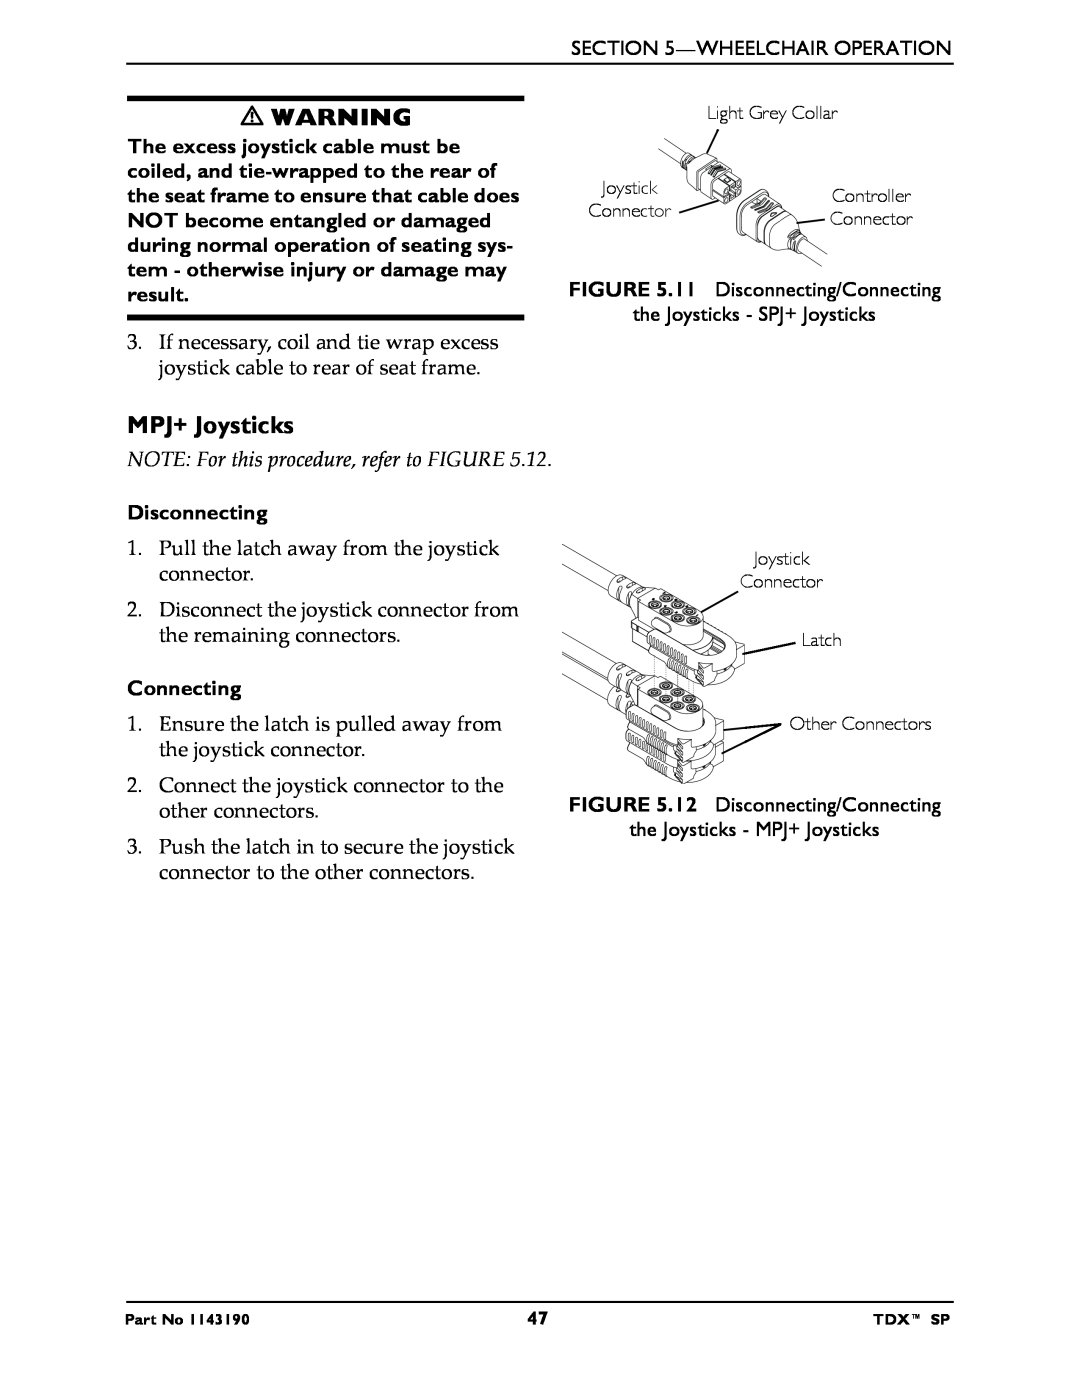 Invacare SP manual MPJ+ Joysticks, NOTE For this procedure, refer to FIGURE 